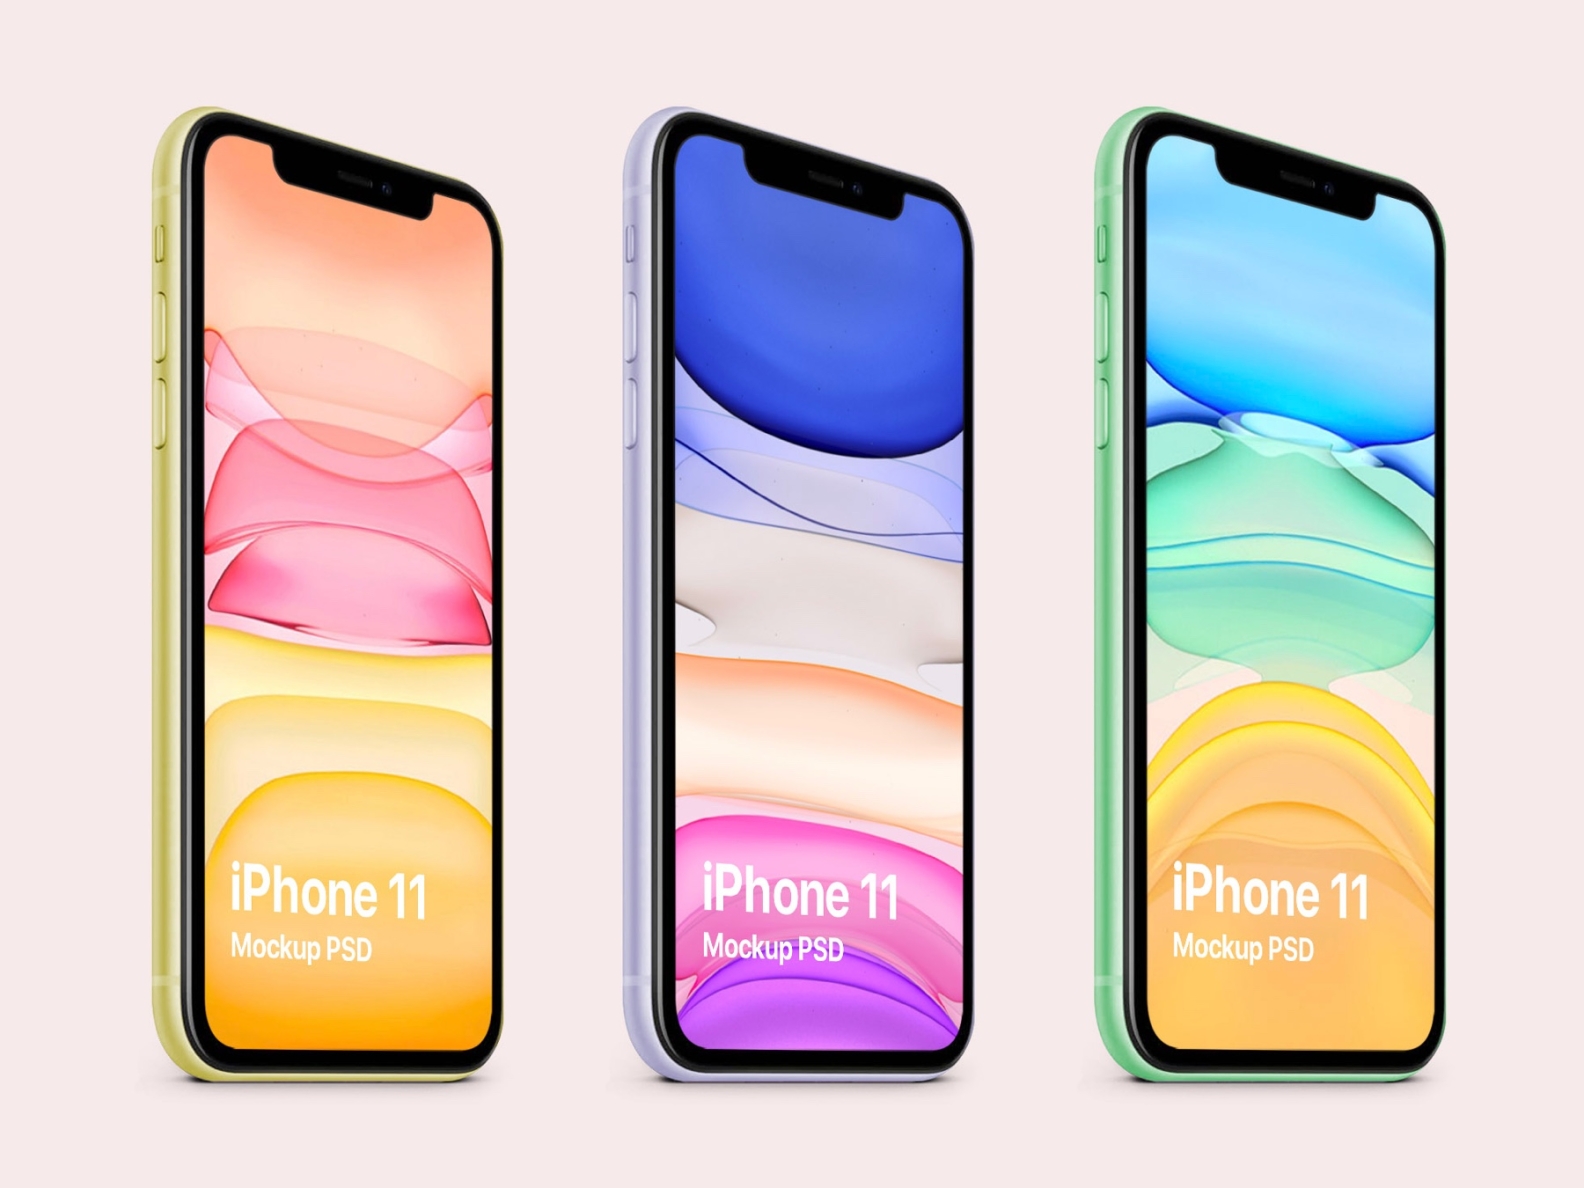 Download iPhone 11 mockup psd freebie by Pegakit on Dribbble